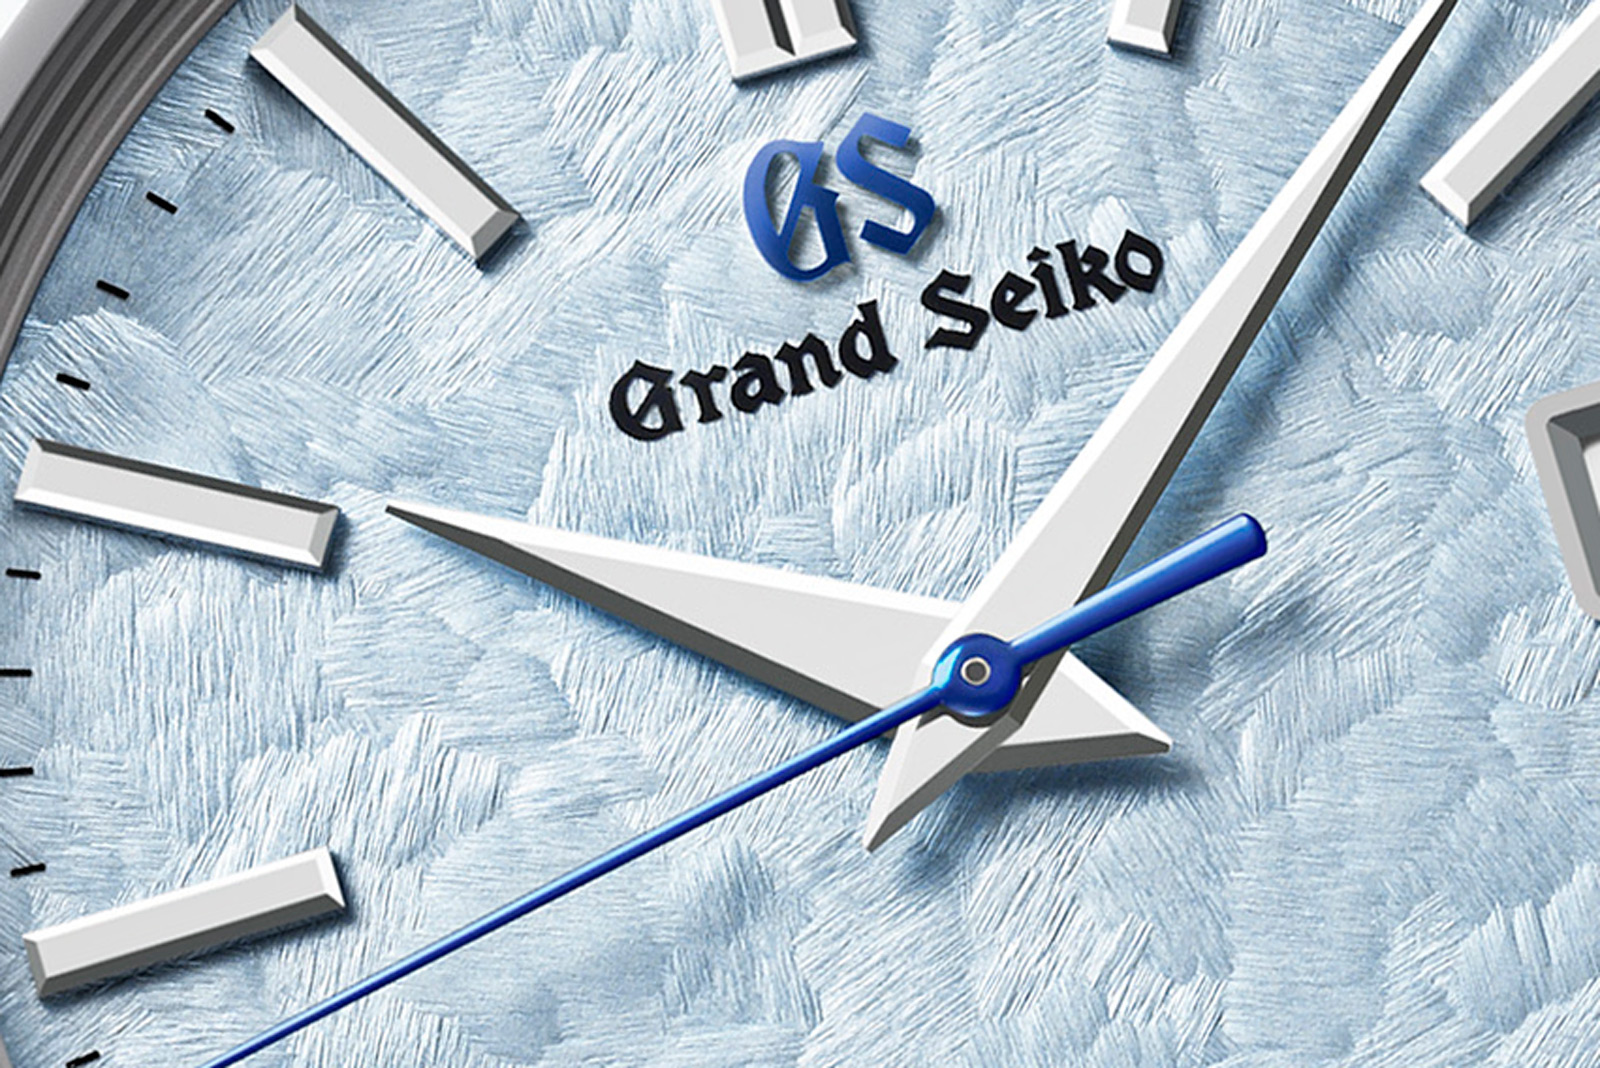 Grand Seiko Introduces the 44GS 55th Anniversary Specially-Adjusted 9F  Quartz | SJX Watches